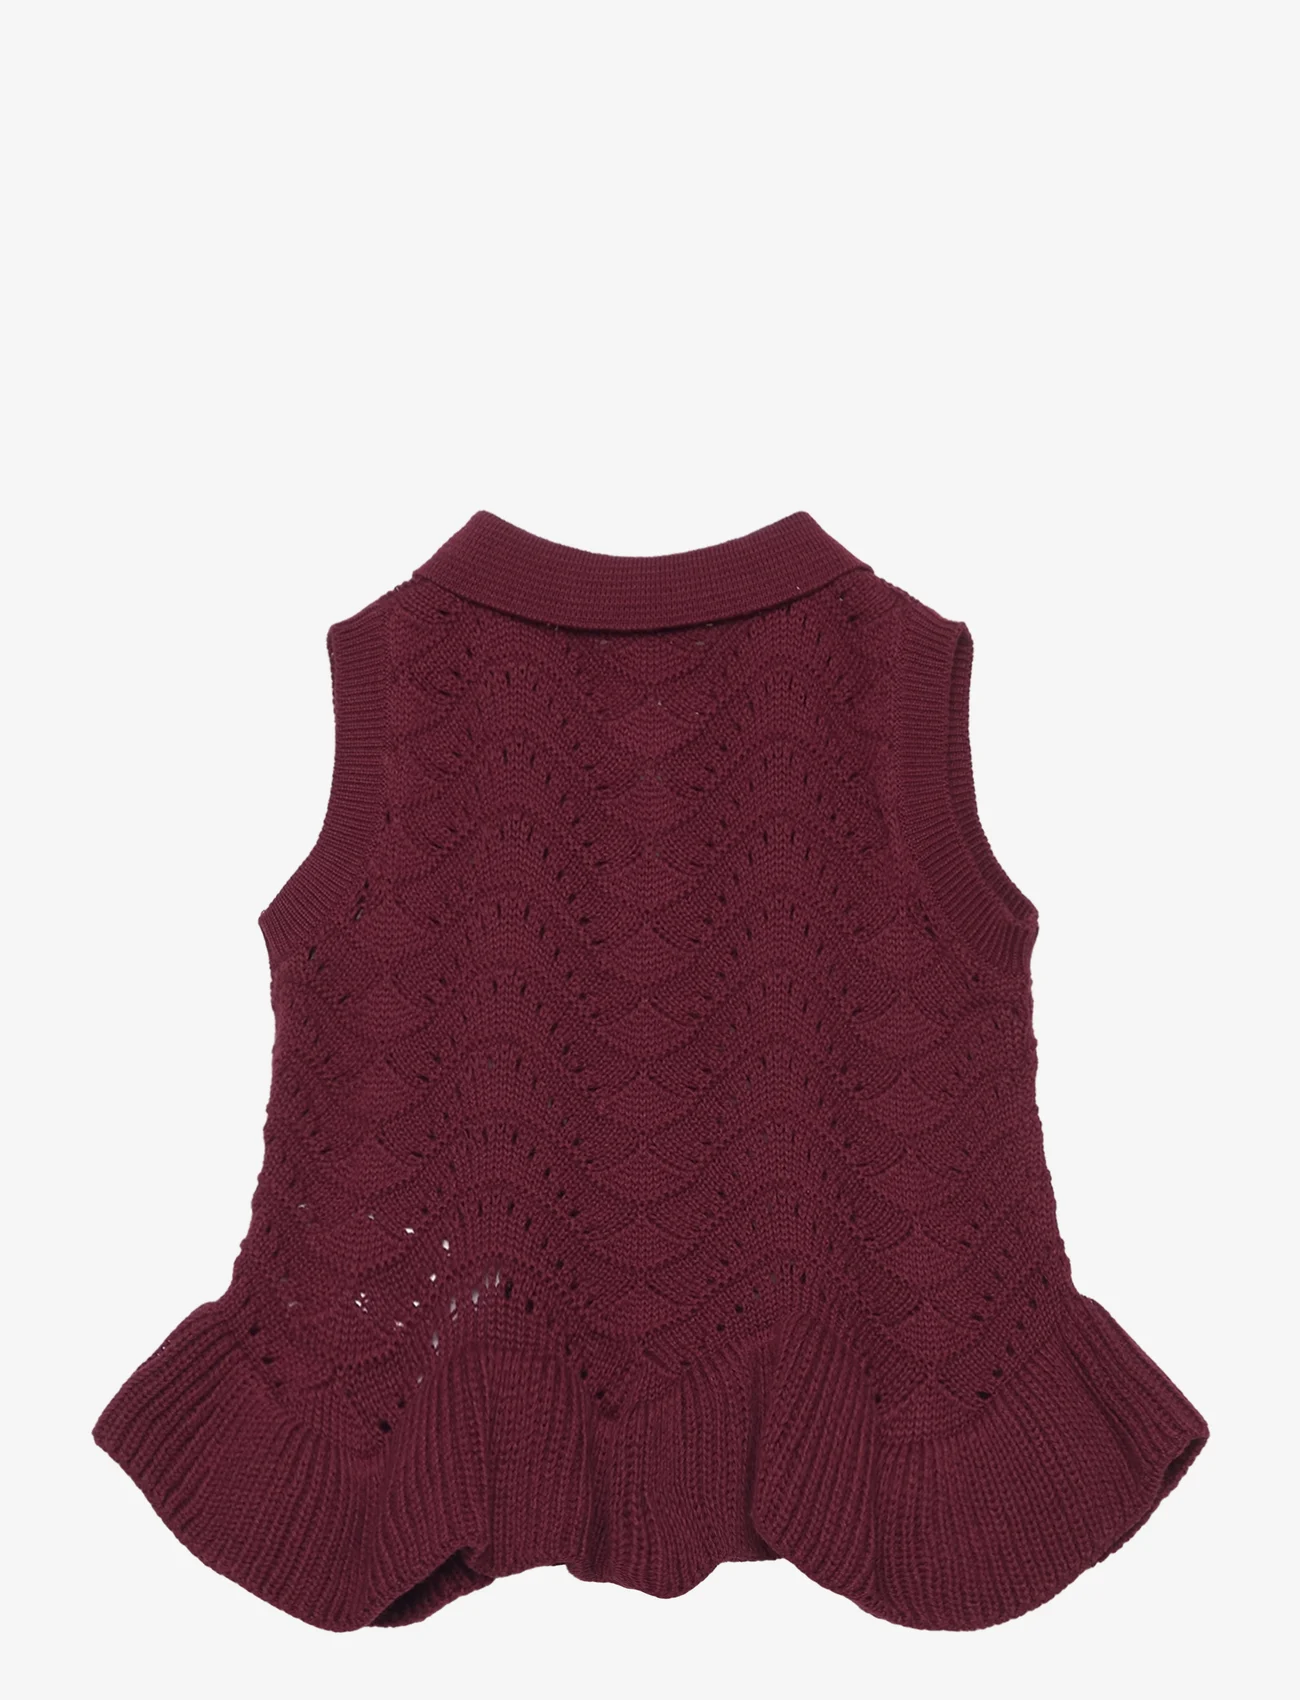 Müsli by Green Cotton - Knit needle out vest baby - vests - fig - 1